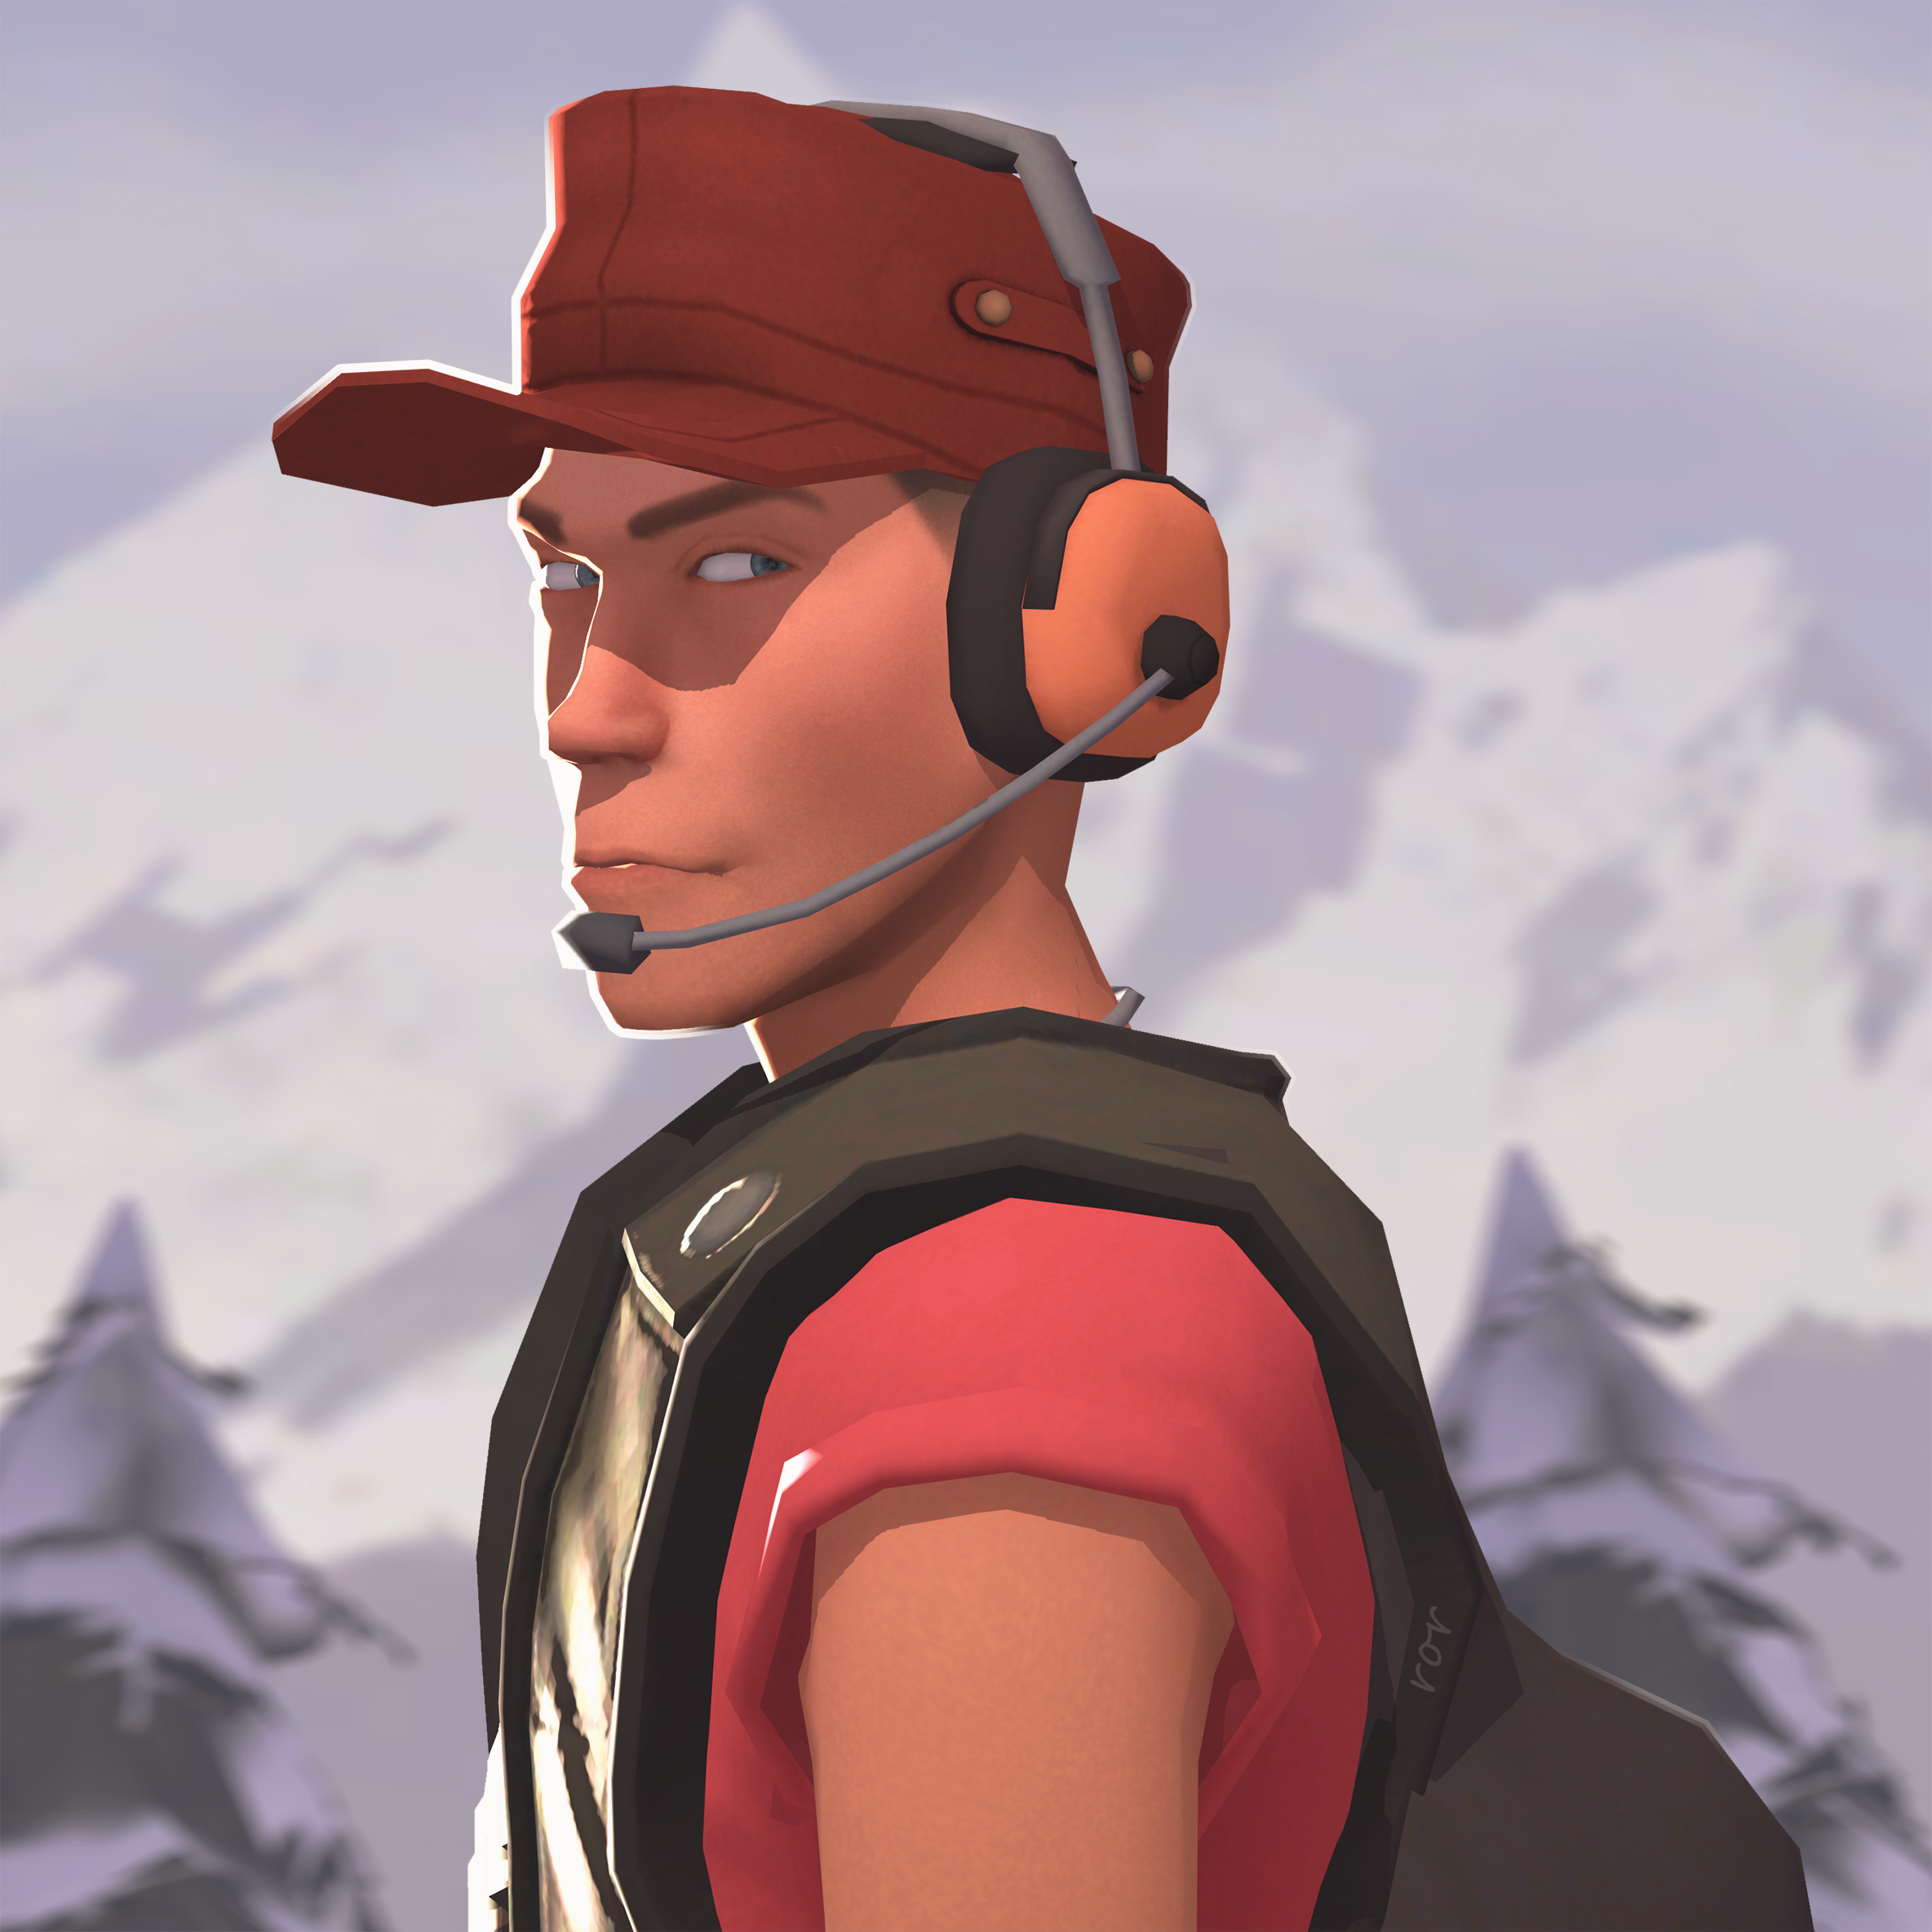 Making free SFM posters yet again - Artist's Lounge - backpack.tf forums